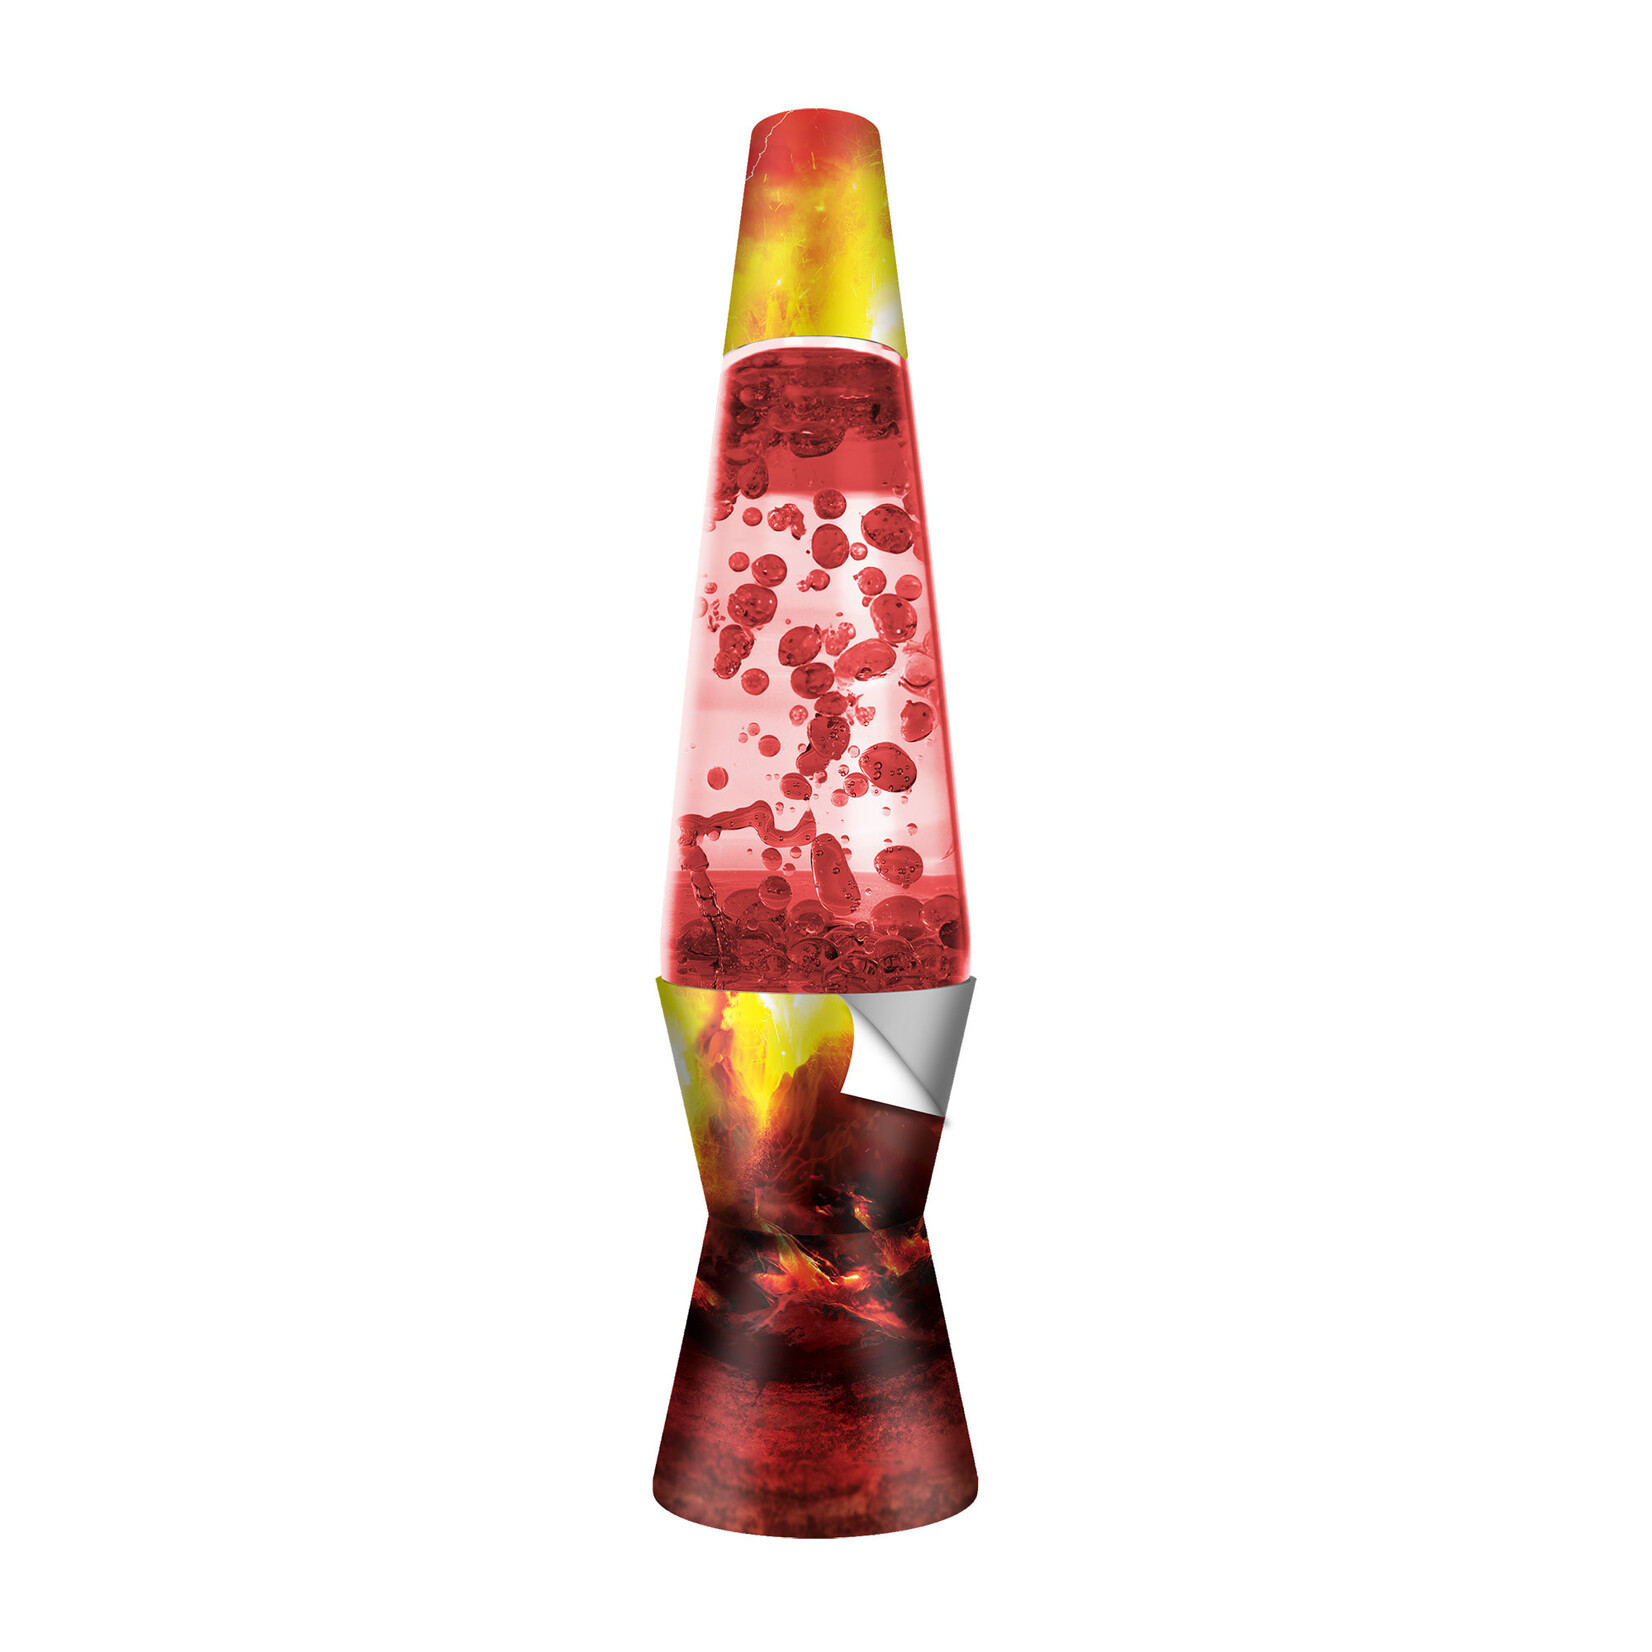 Make Your Own Lava Lamp